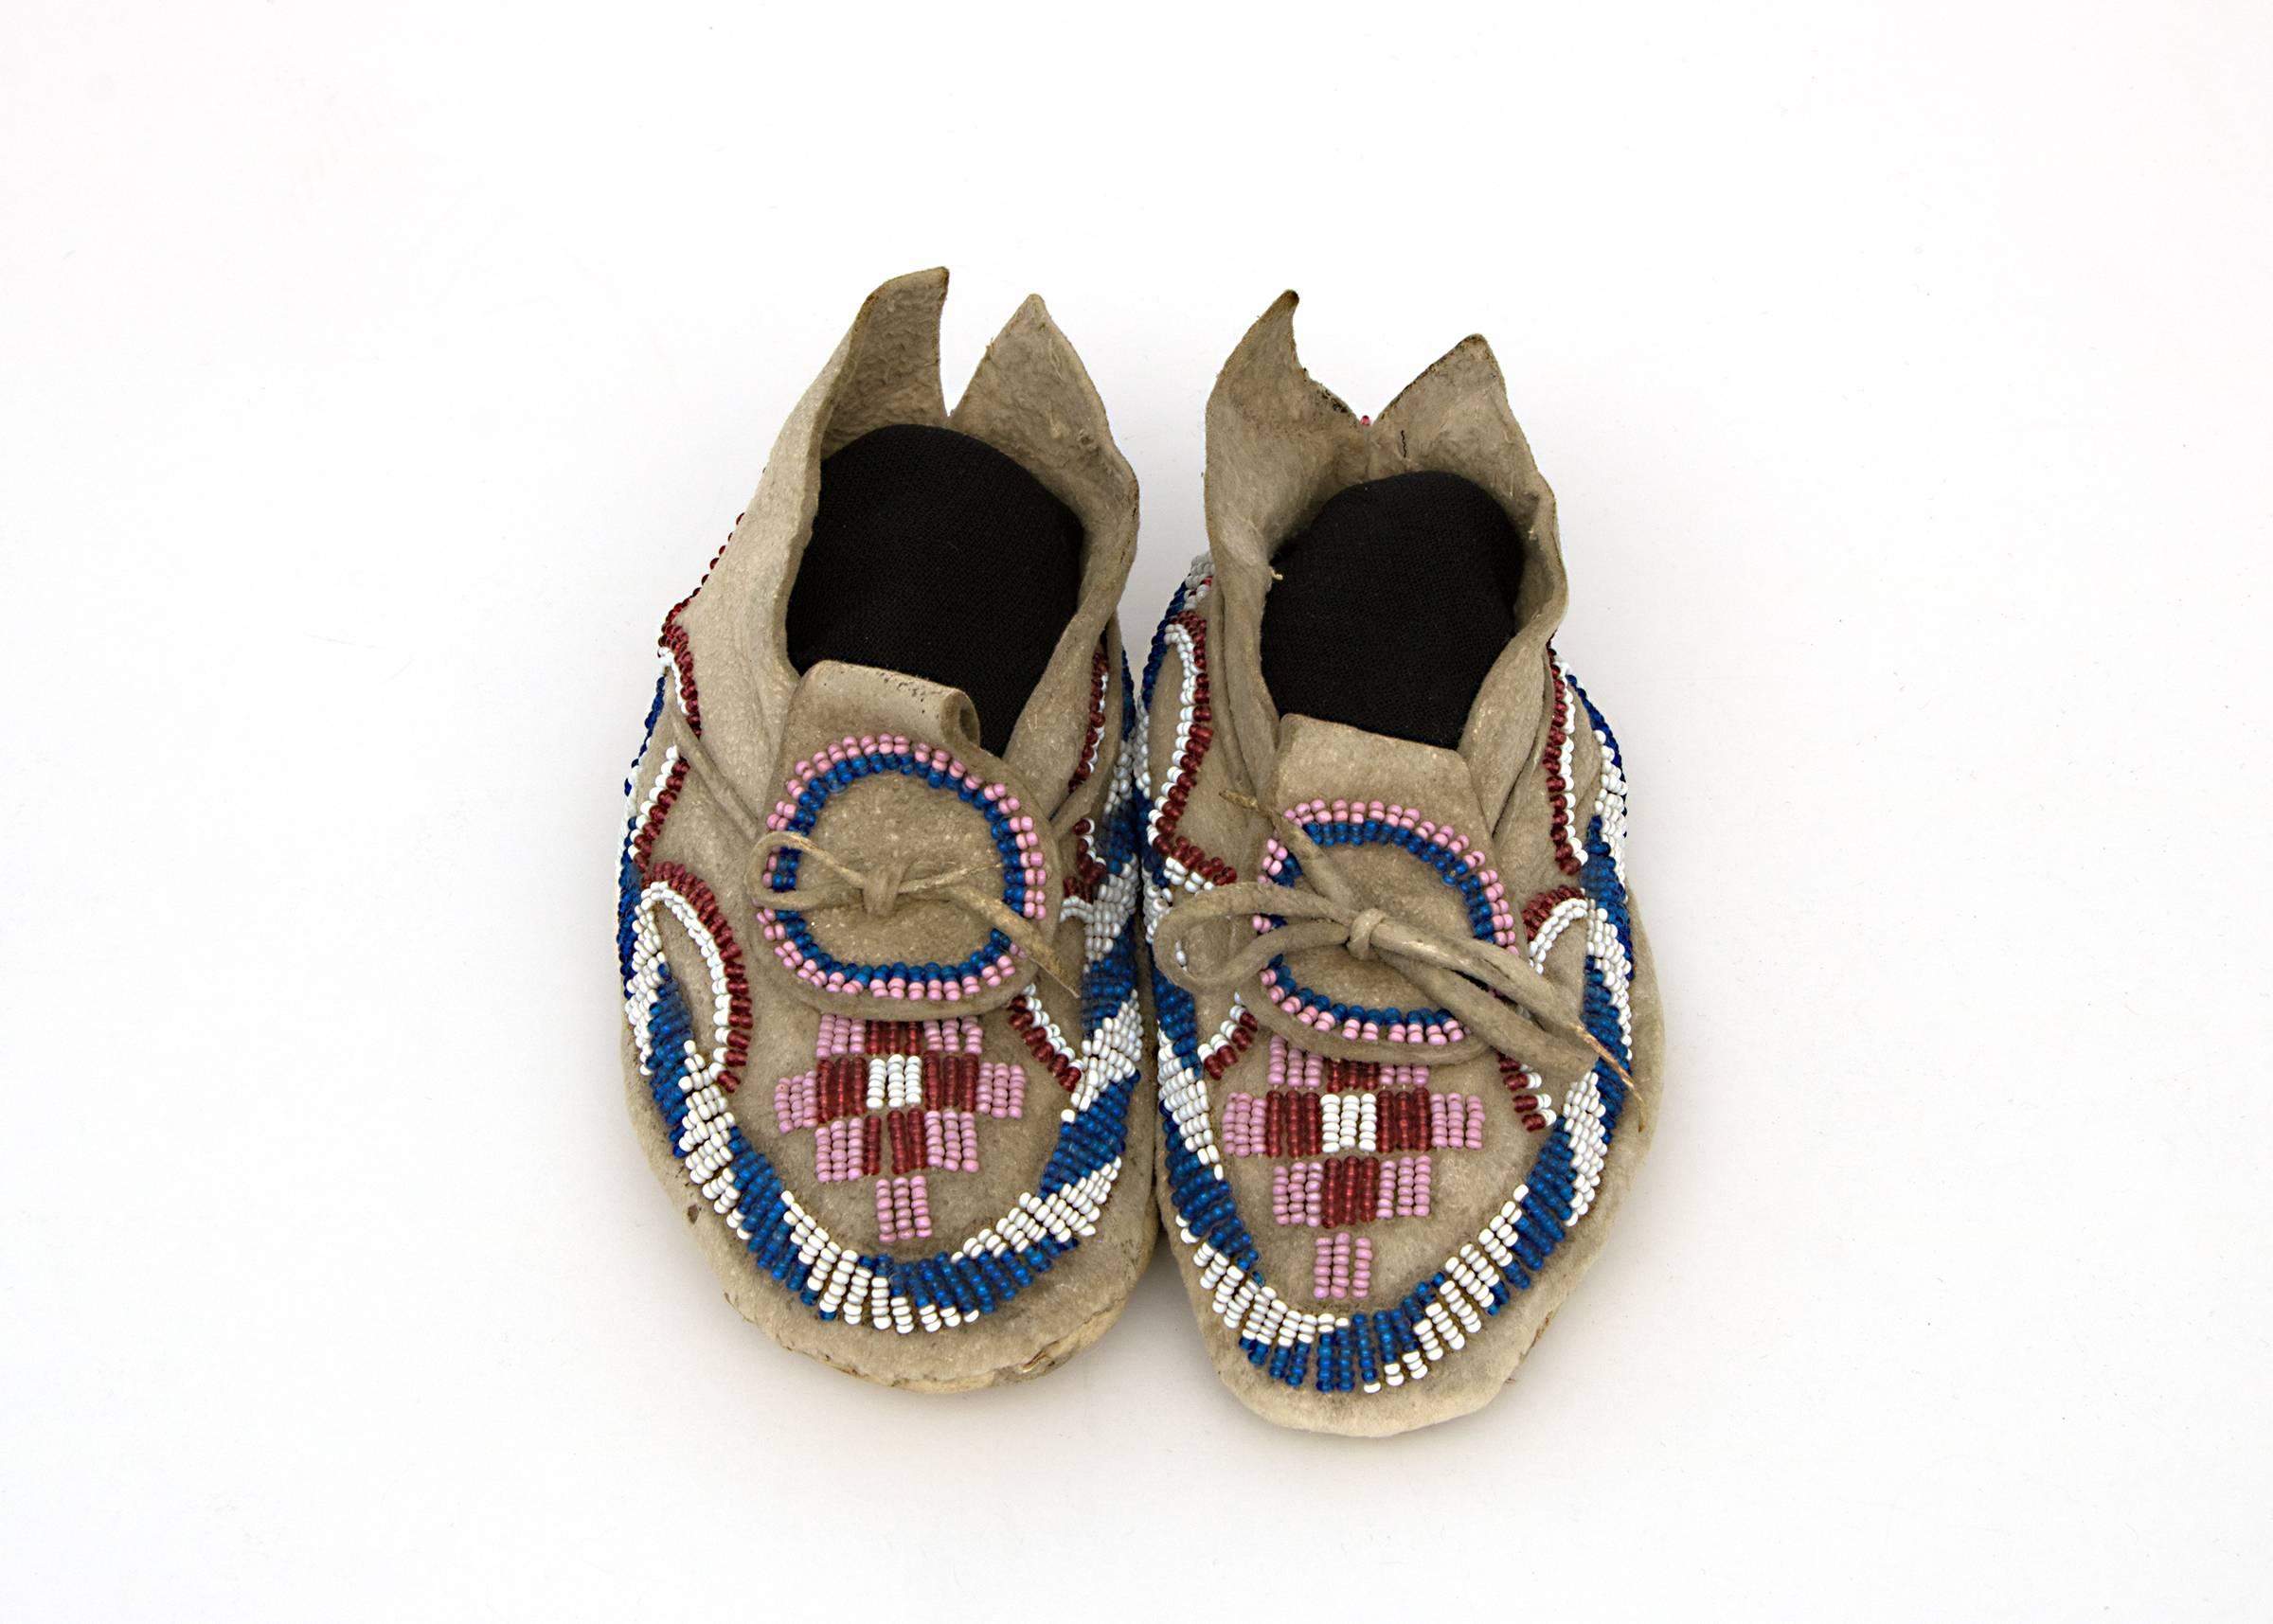 A pair of 19th century antique Native American child size beaded Kiowa-Apache (Plains Indian) moccasins. Constructed of Native tanned hide, sinew-sewn and partially beaded with trade beads in red, pink, white and blue, circa 1875-1900.  
The Kiowa,